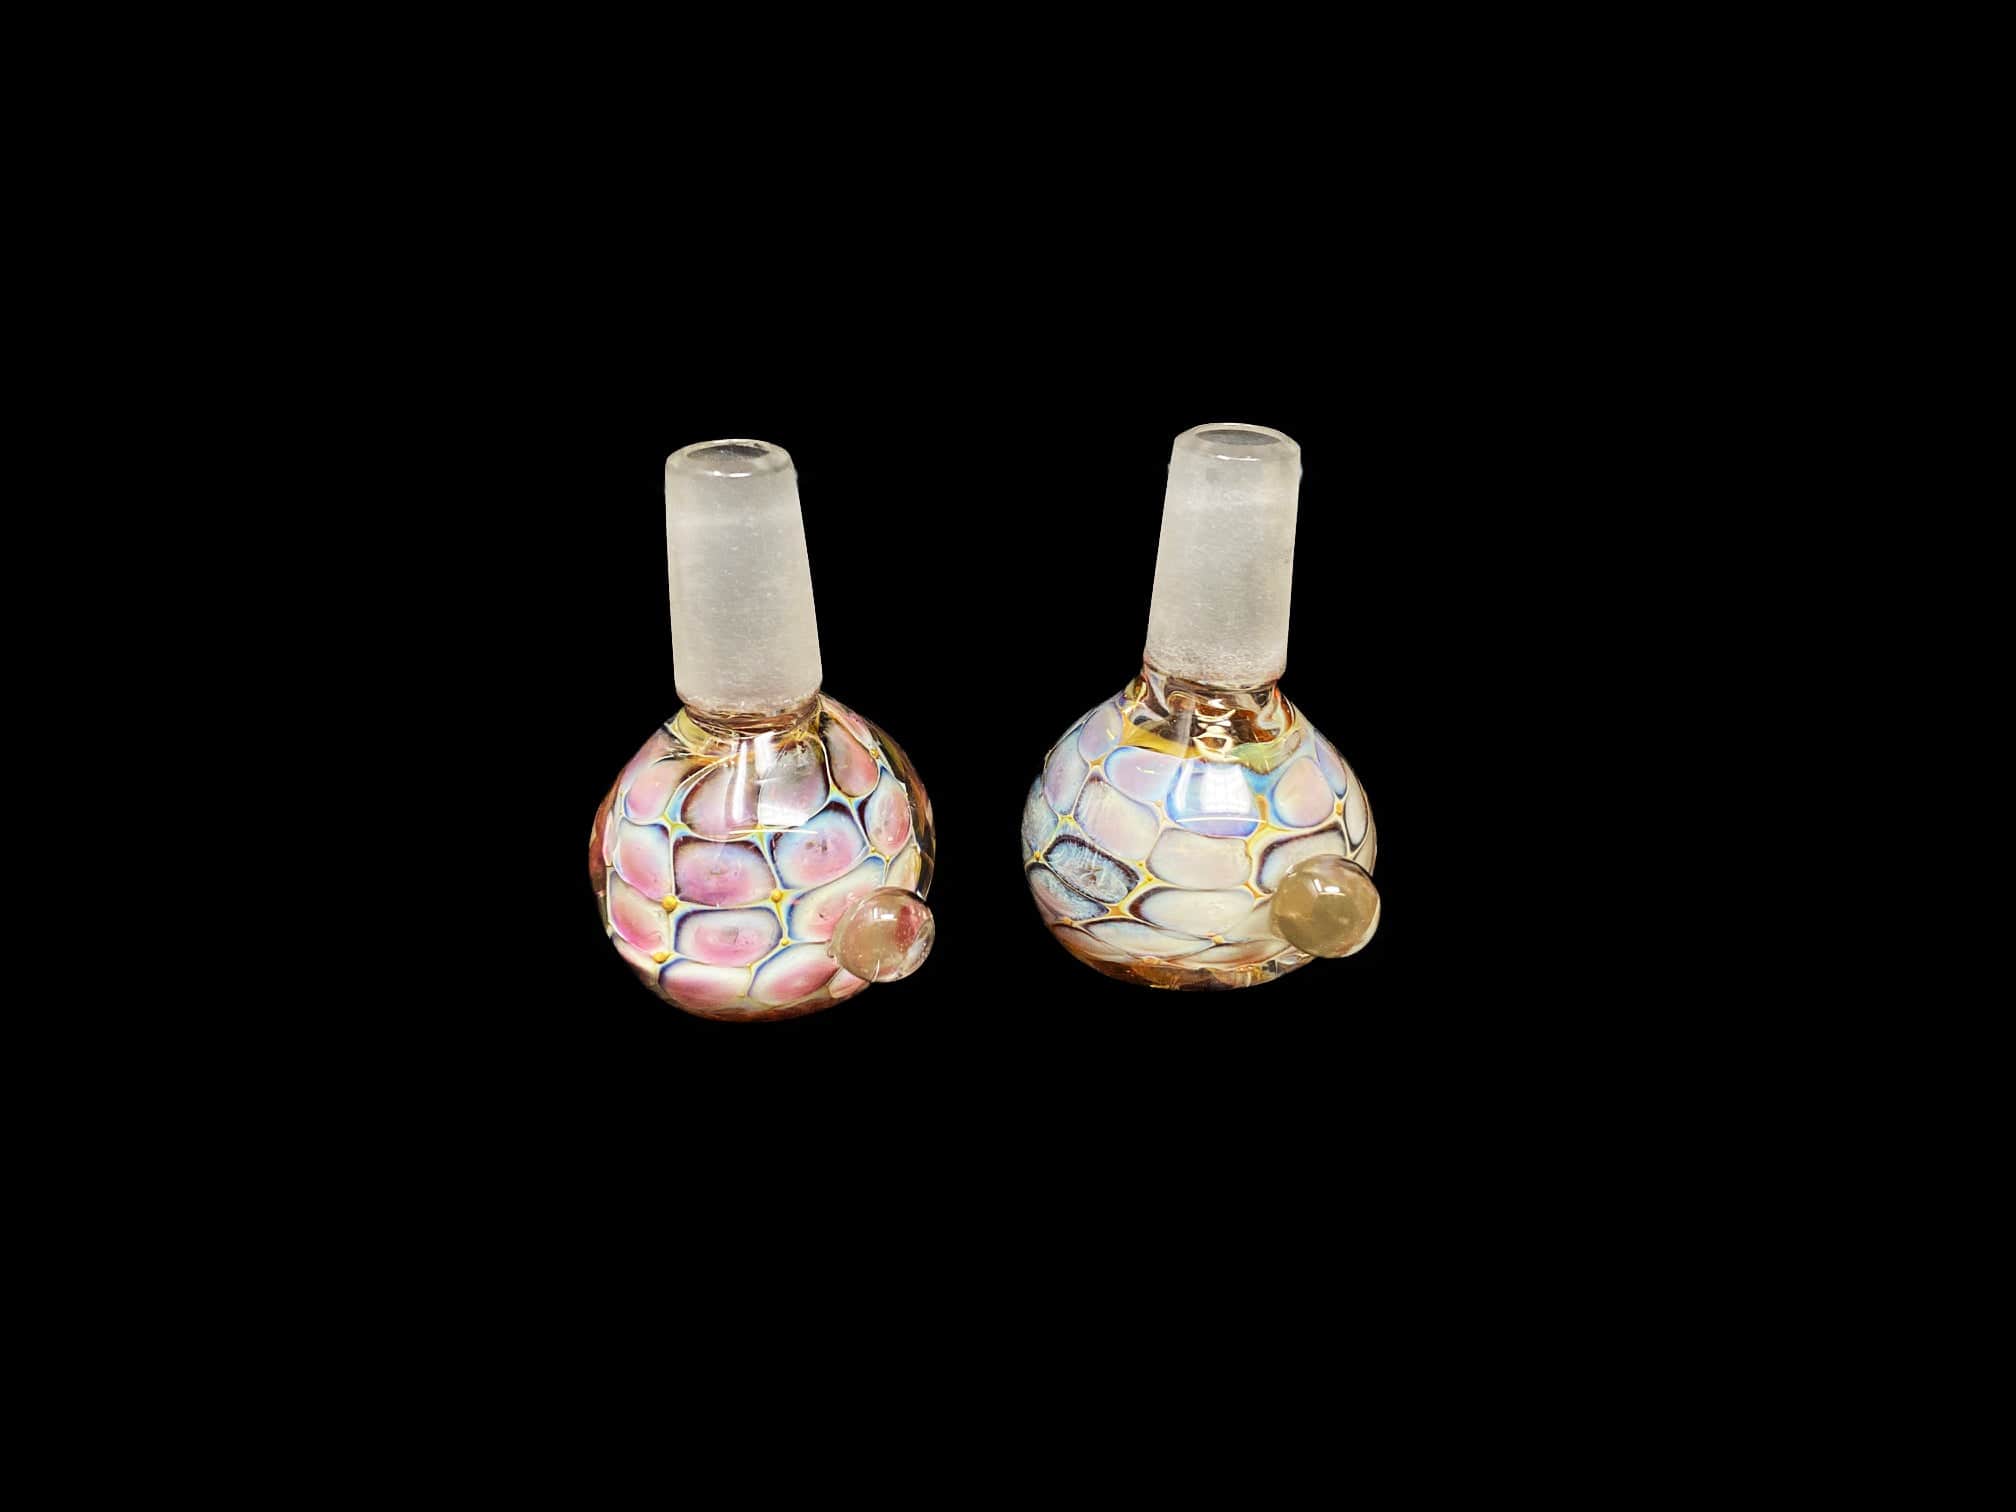 Himalayan Creation Alternatives Handmade 14mm Glass Bowl Piece w/ Pink & White Fumed Accents